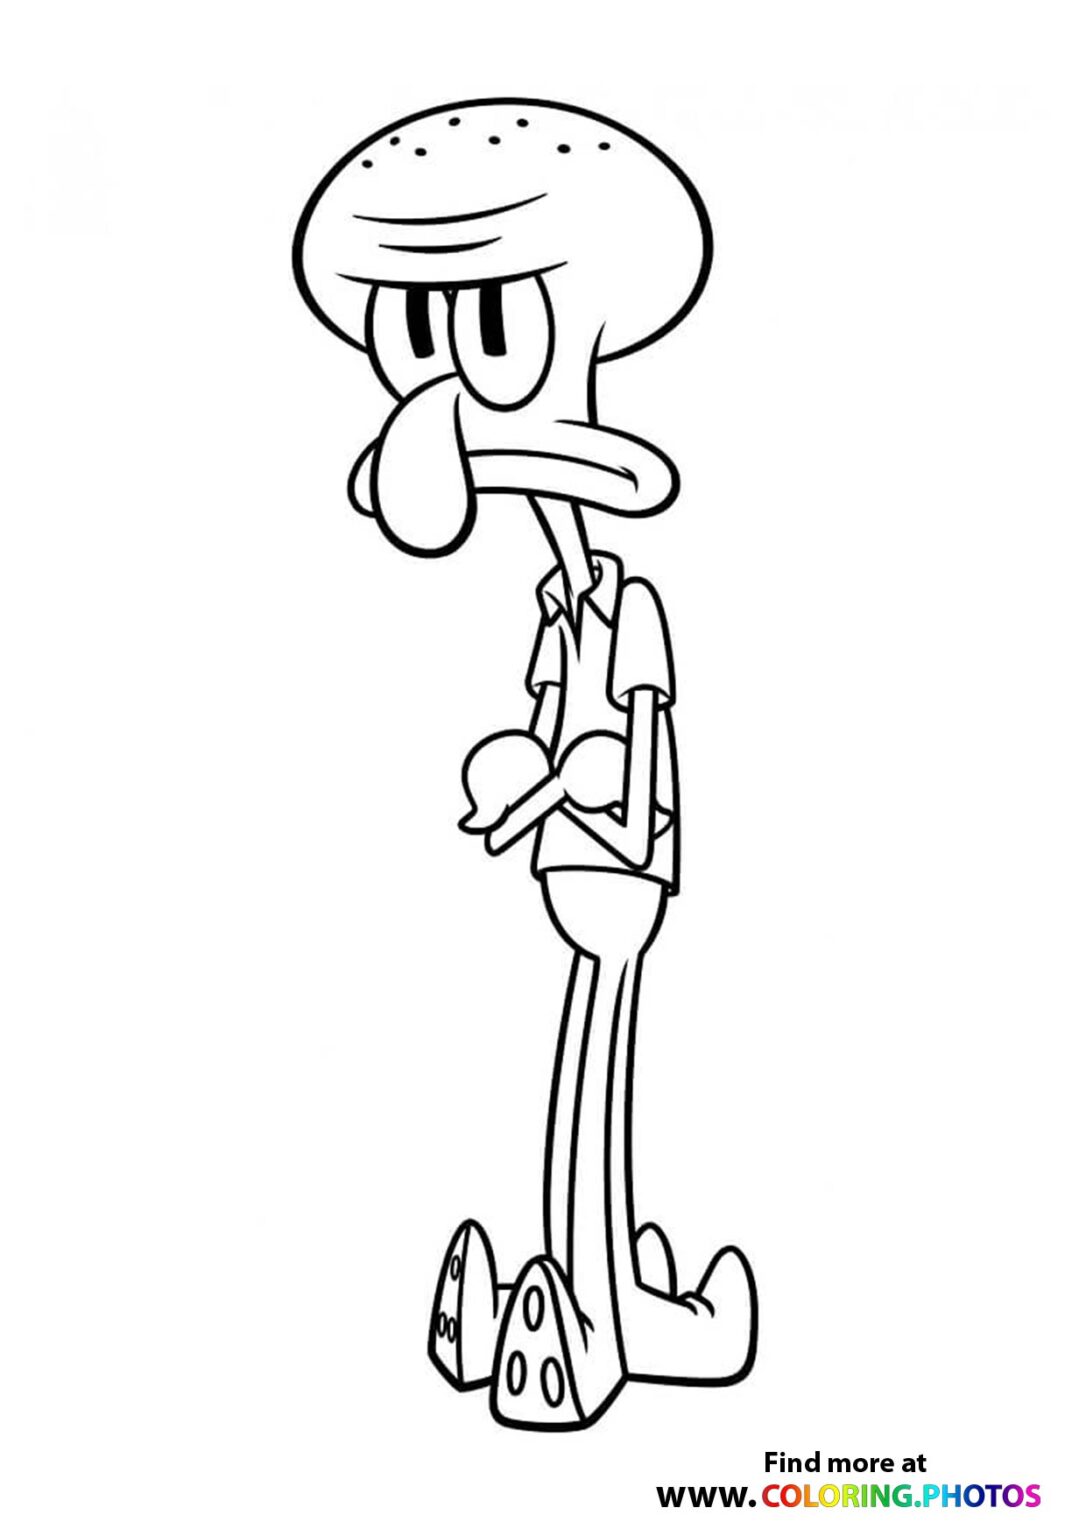 SpongeBob Squidward - Coloring Pages for kids